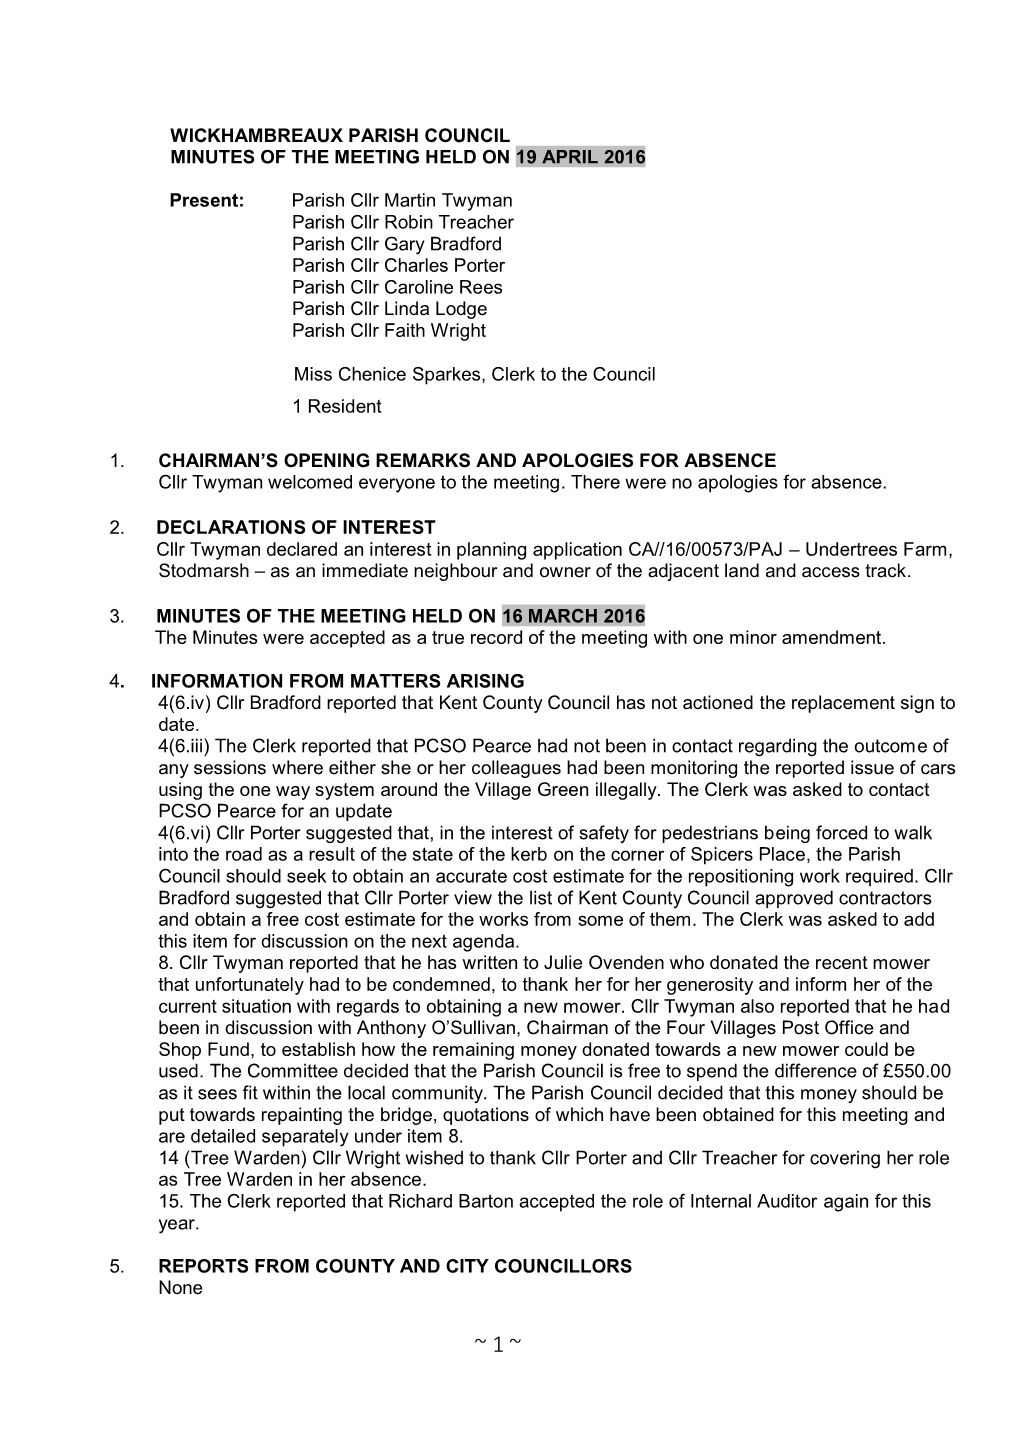 Wickhambreaux Parish Council Minutes of the Meeting Held on 19 April 2016